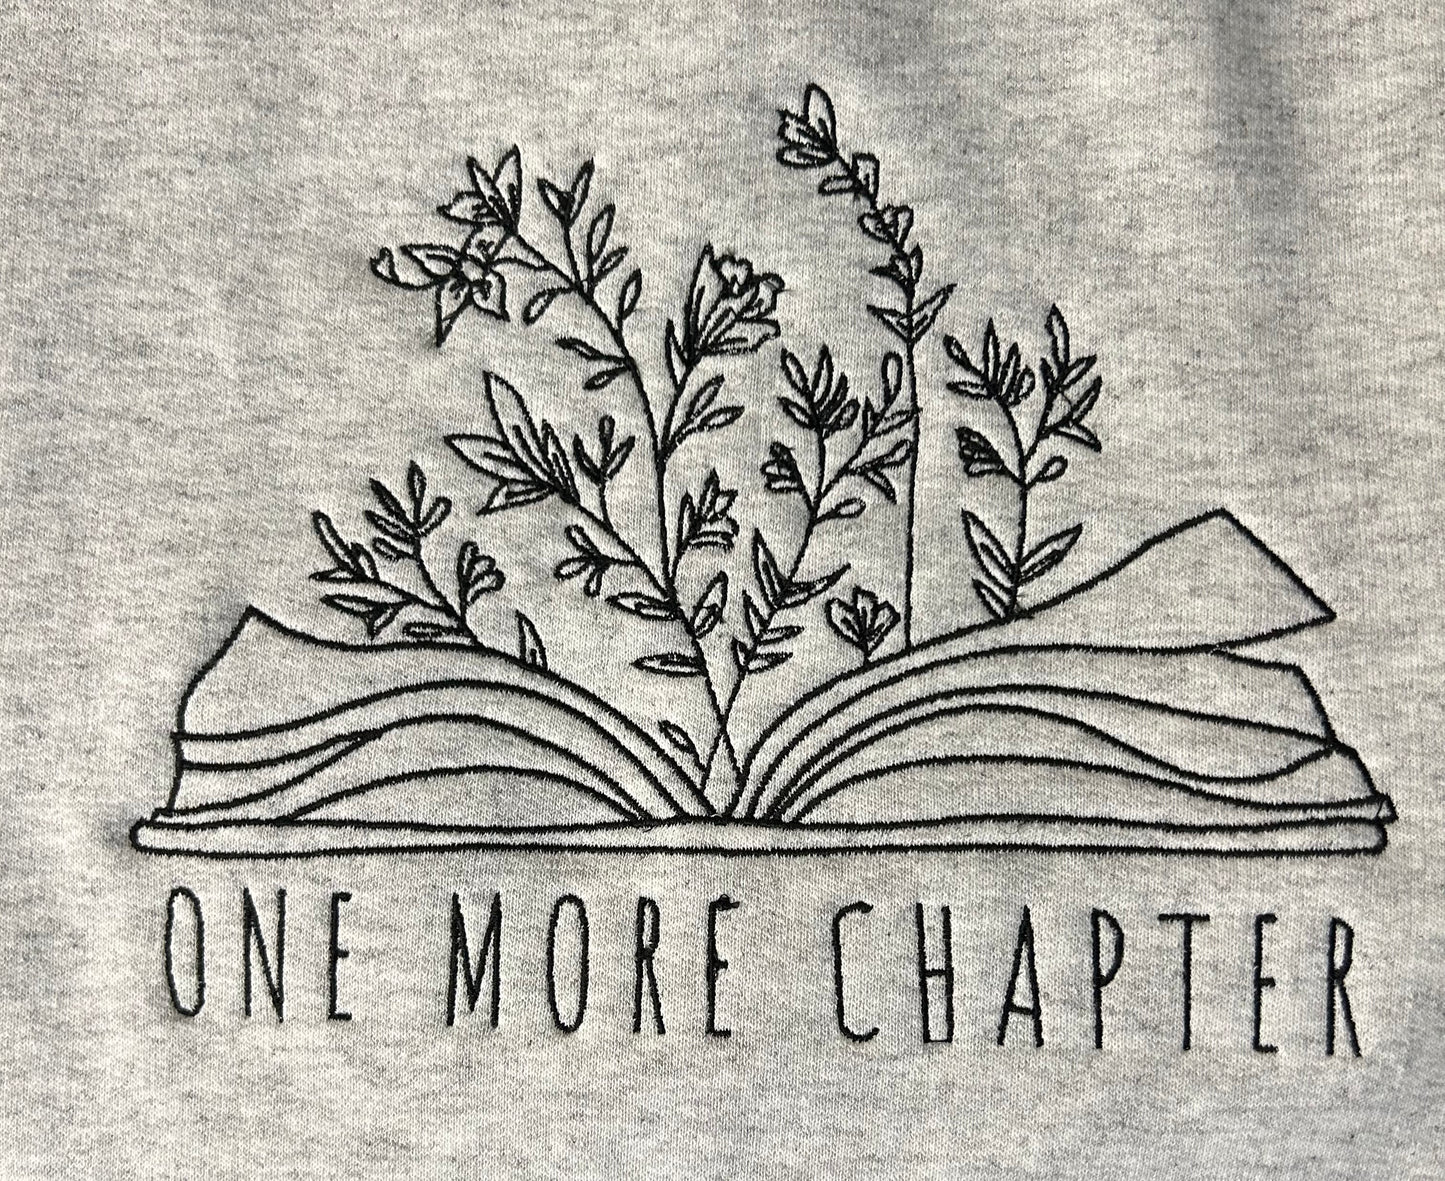 One More Chapter